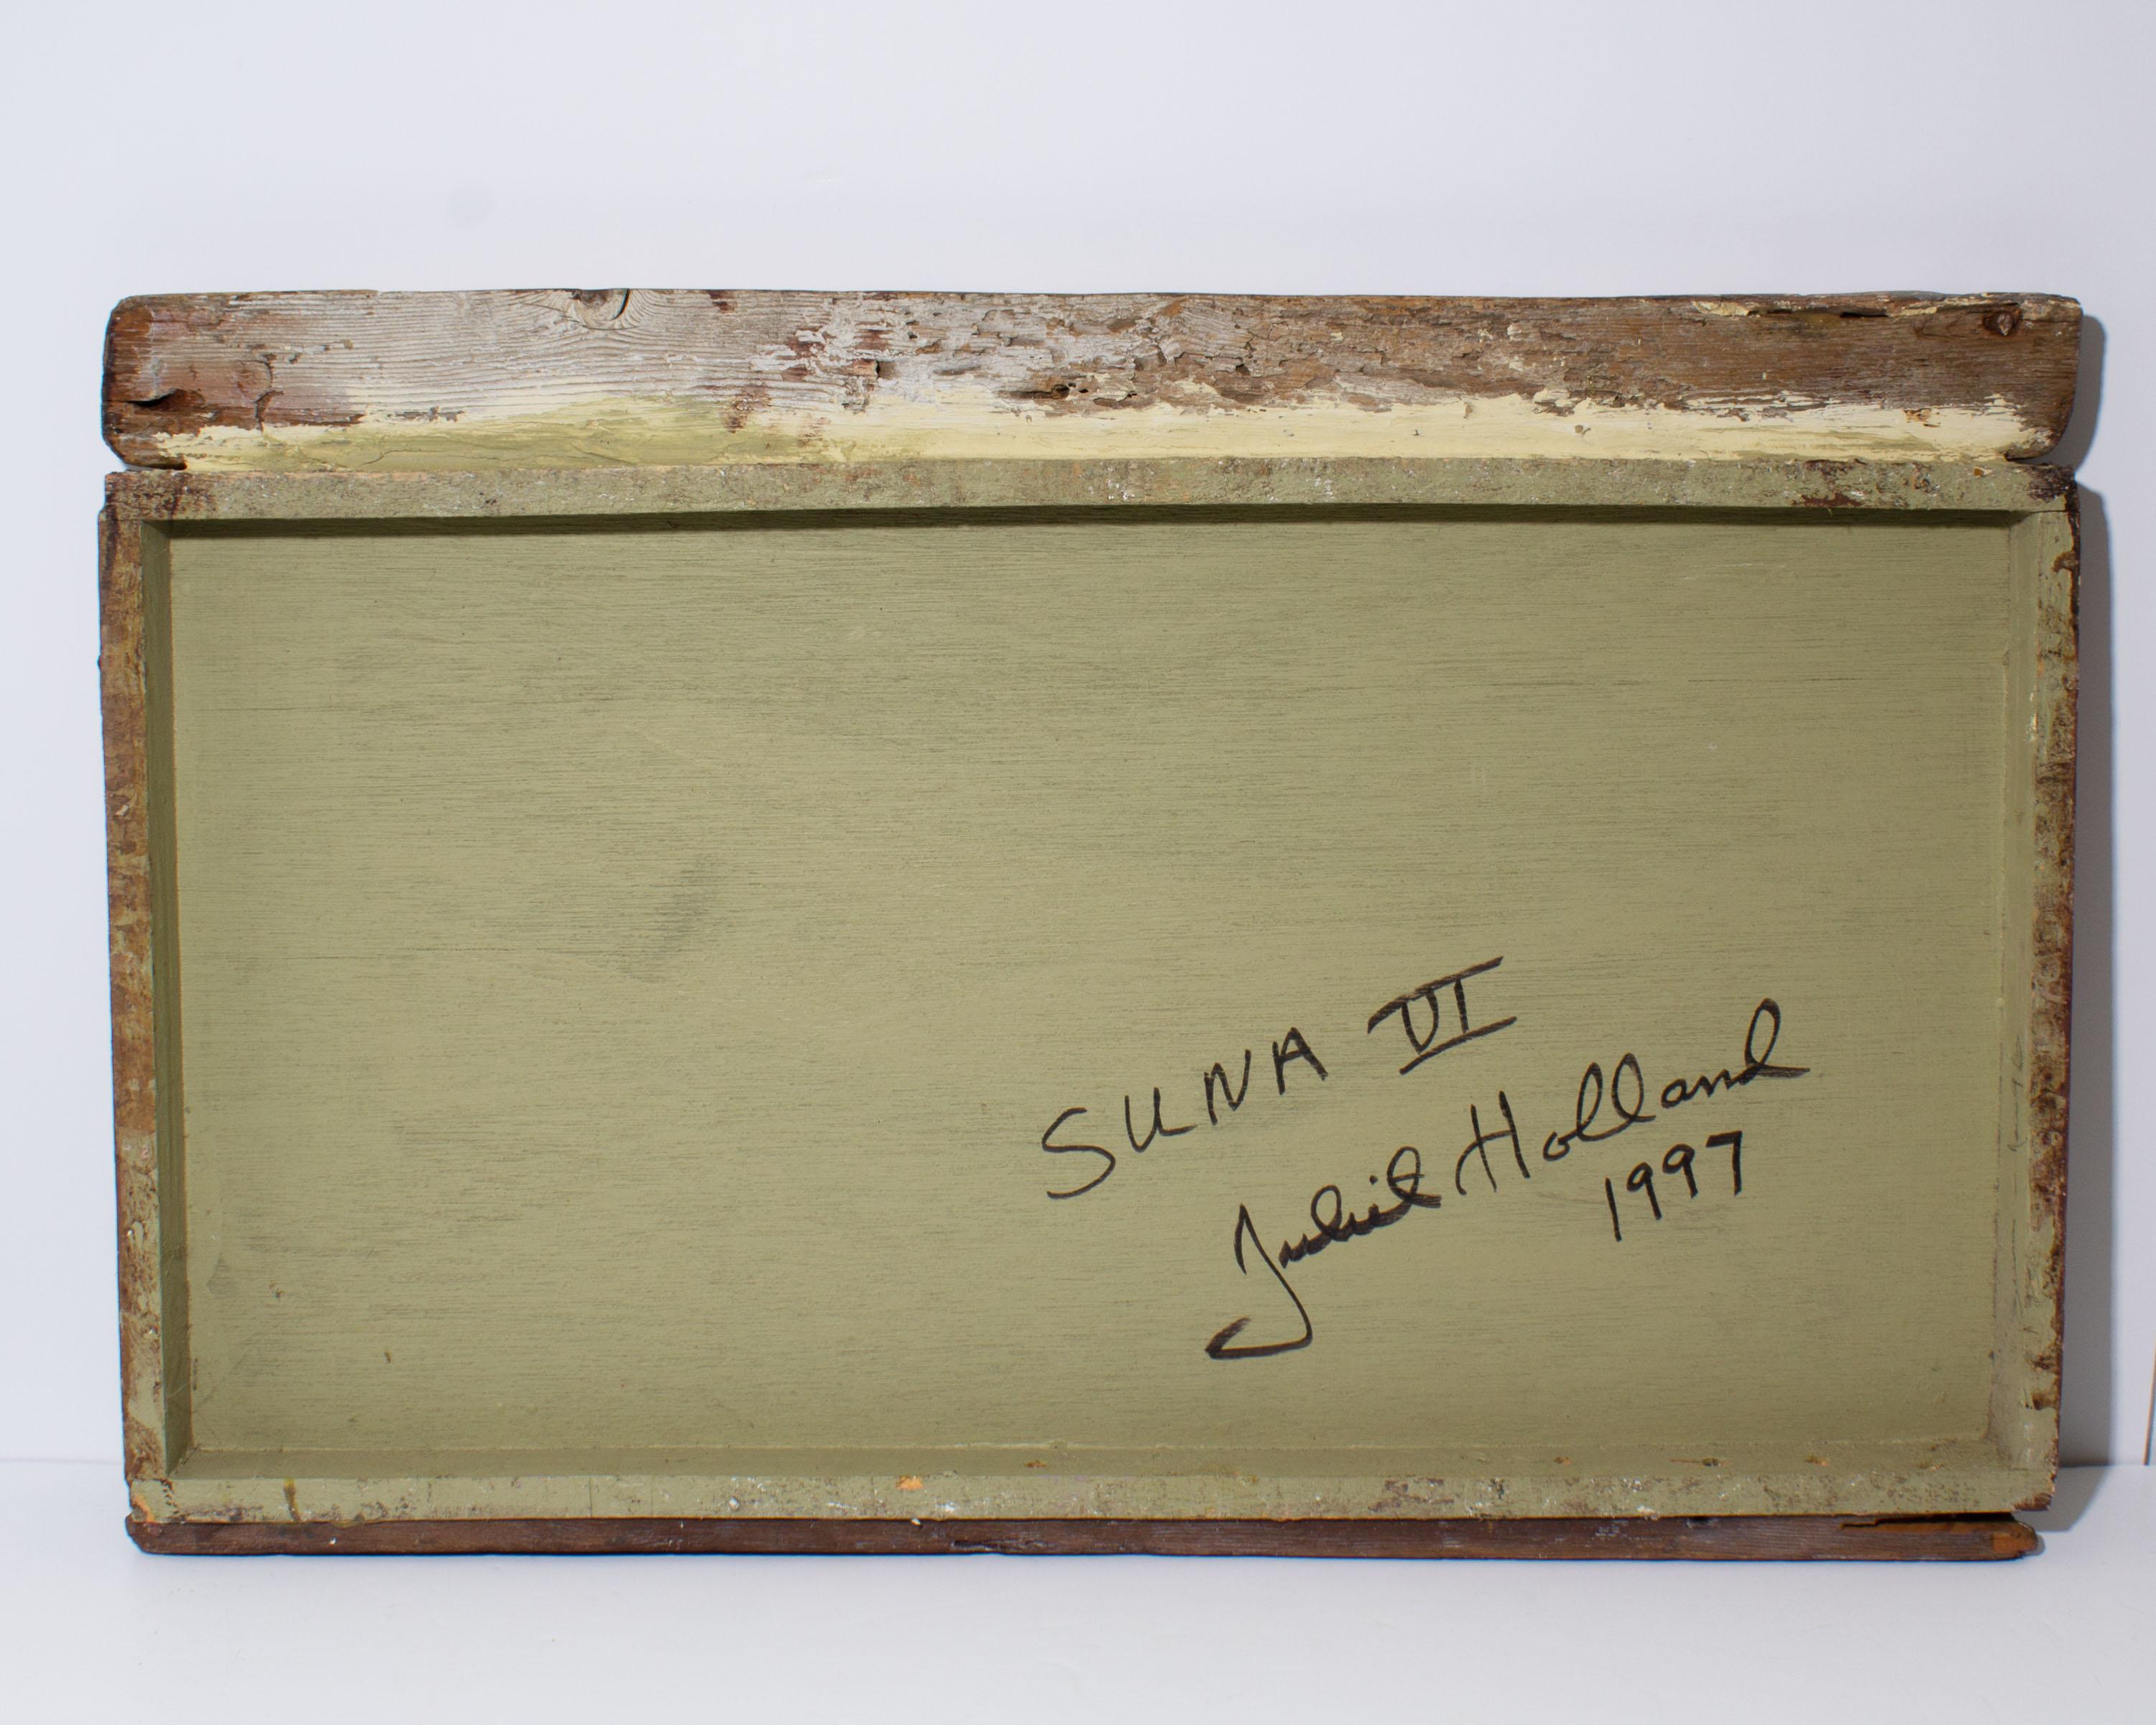 Late 20th Century Juliet Holland Signed 1997 “Suma vi” Mixed Media Wall Assemblage For Sale